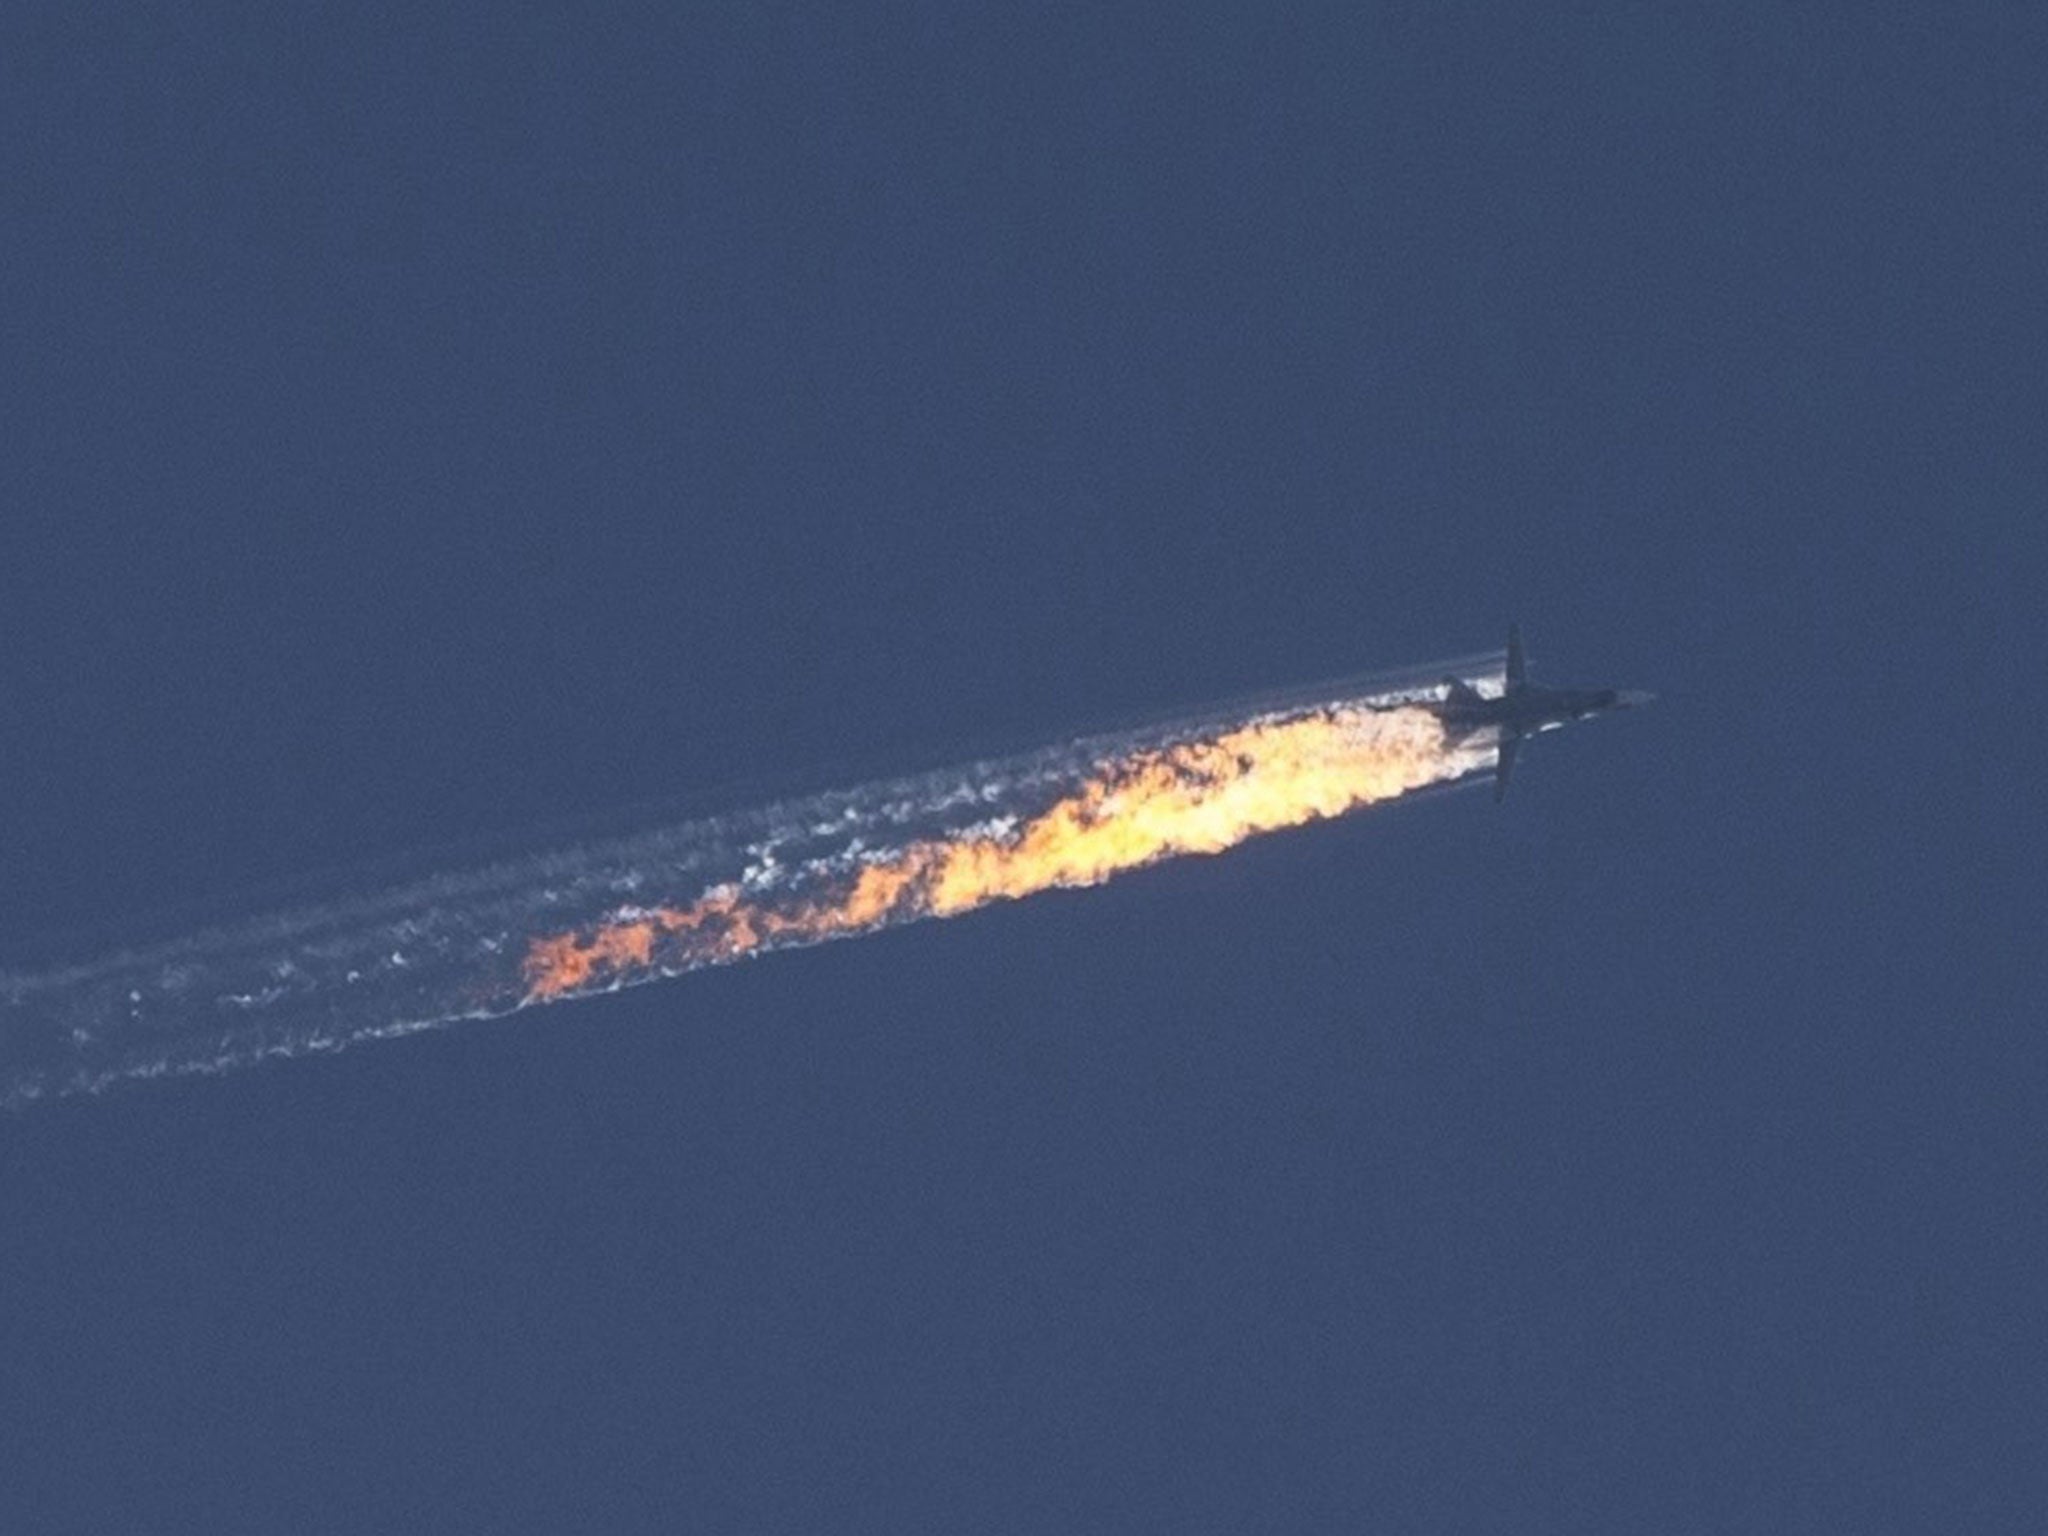 A trail of flames is seen behind the jet after it was struck by the Turkish military